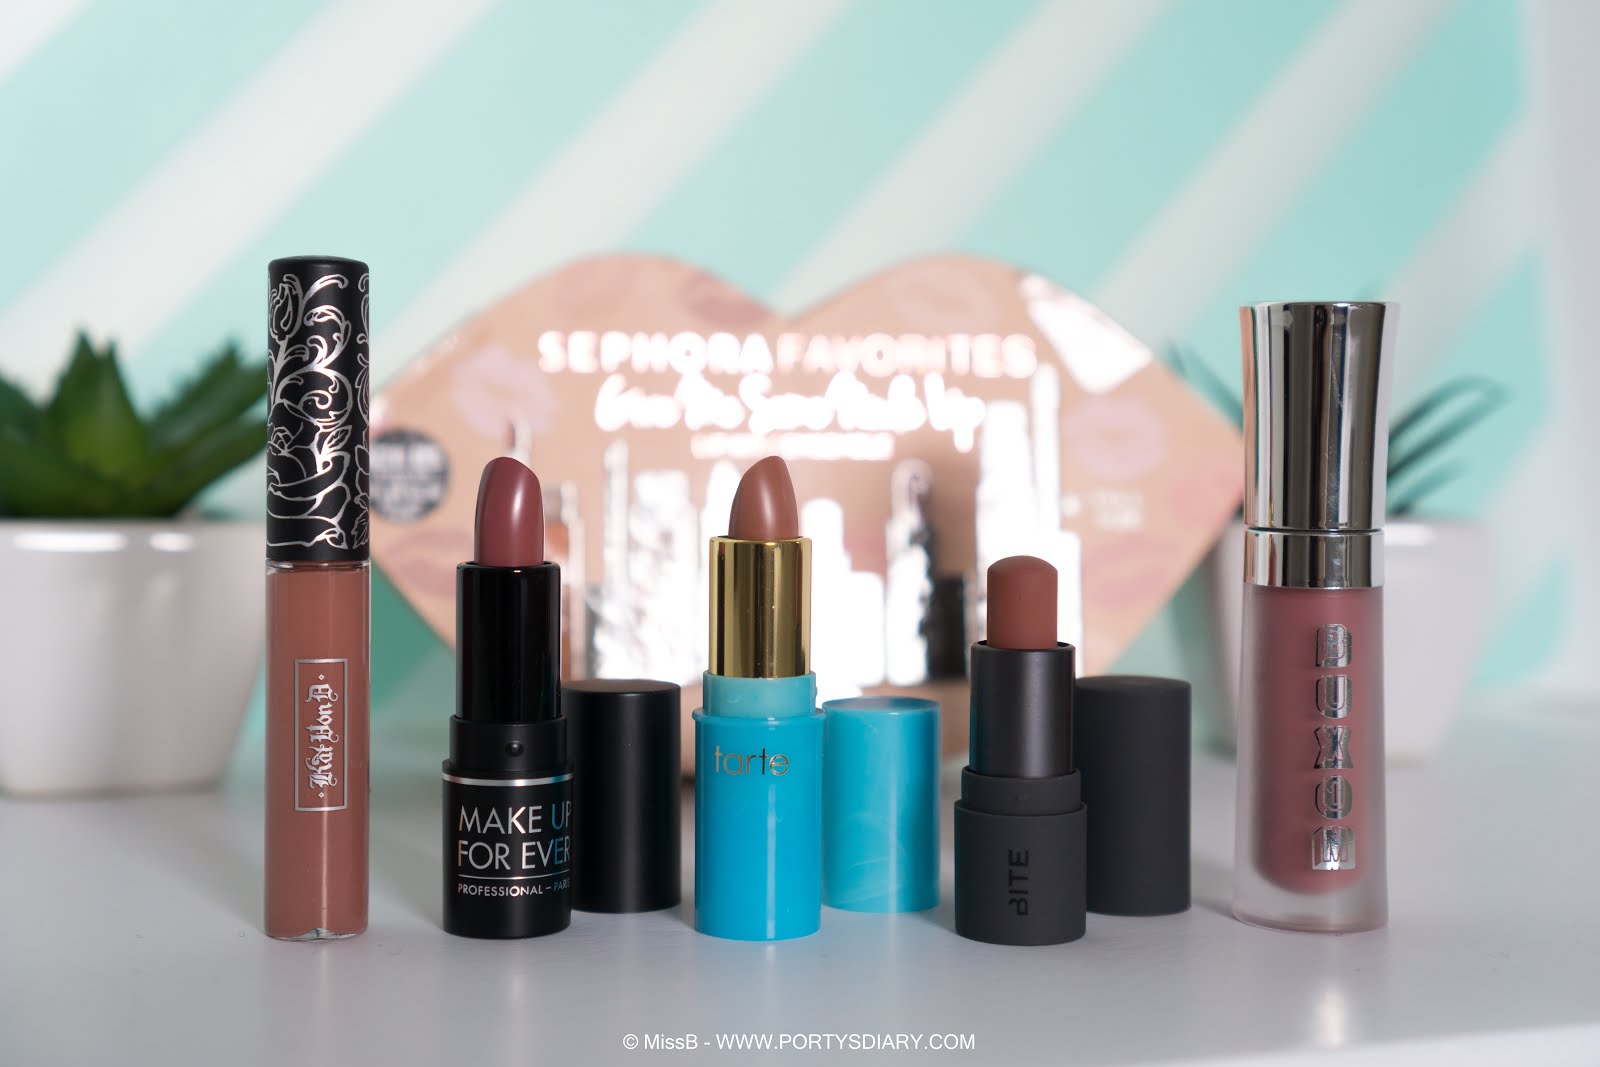 BEAUTY | Give Me Some Nude Lip - Sephora favorites. Review and swatches. Includes:Kat Von D, Buxom, Ciaté, tarte and Make Up Forever. Photos with Sony a6000 + SEL35F18. Porty's Diary.